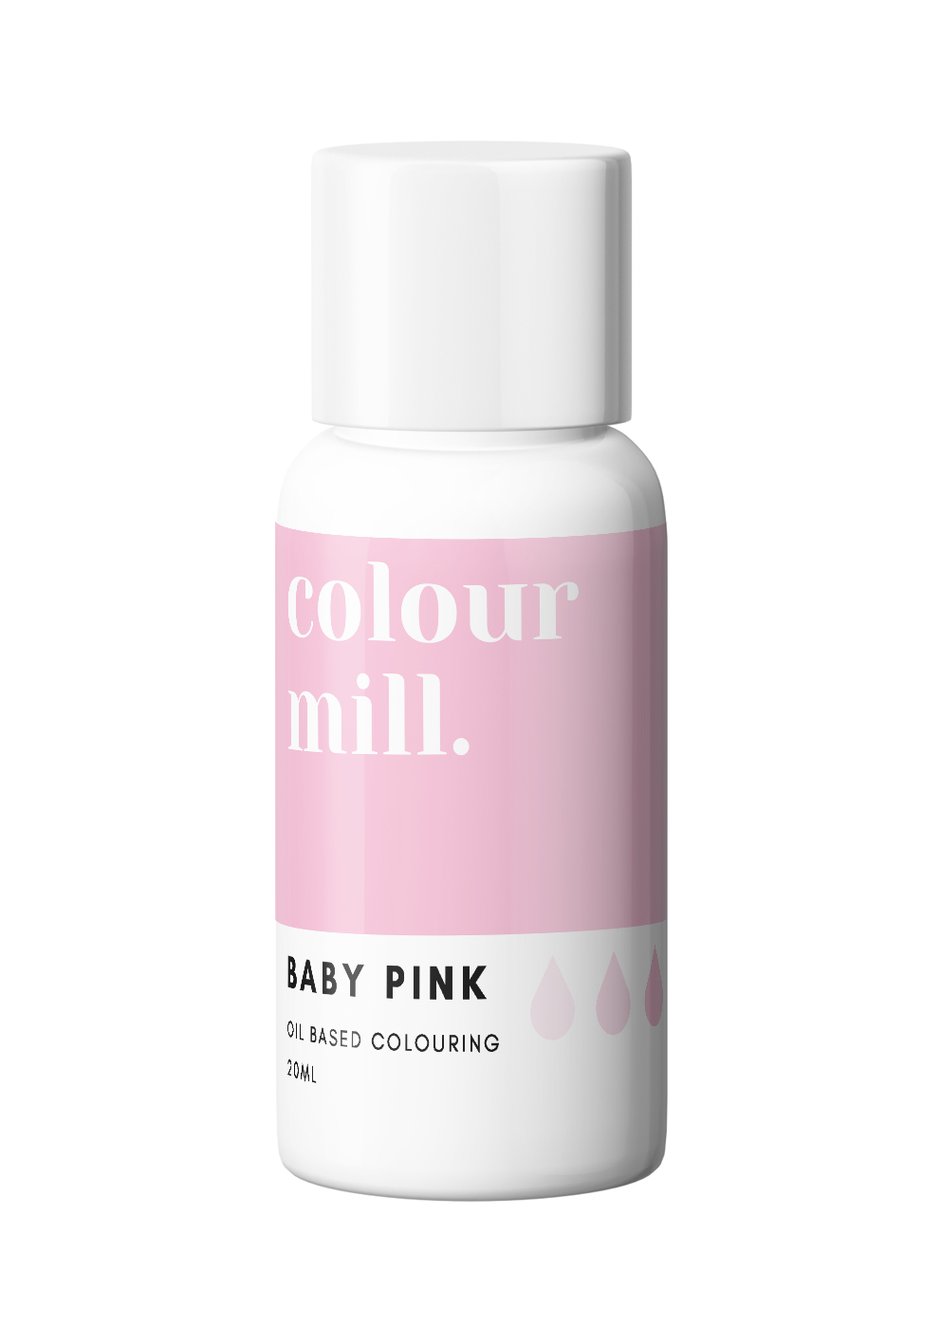 Baby Pink, 20ml, Colour Mill Oil Based Colouring